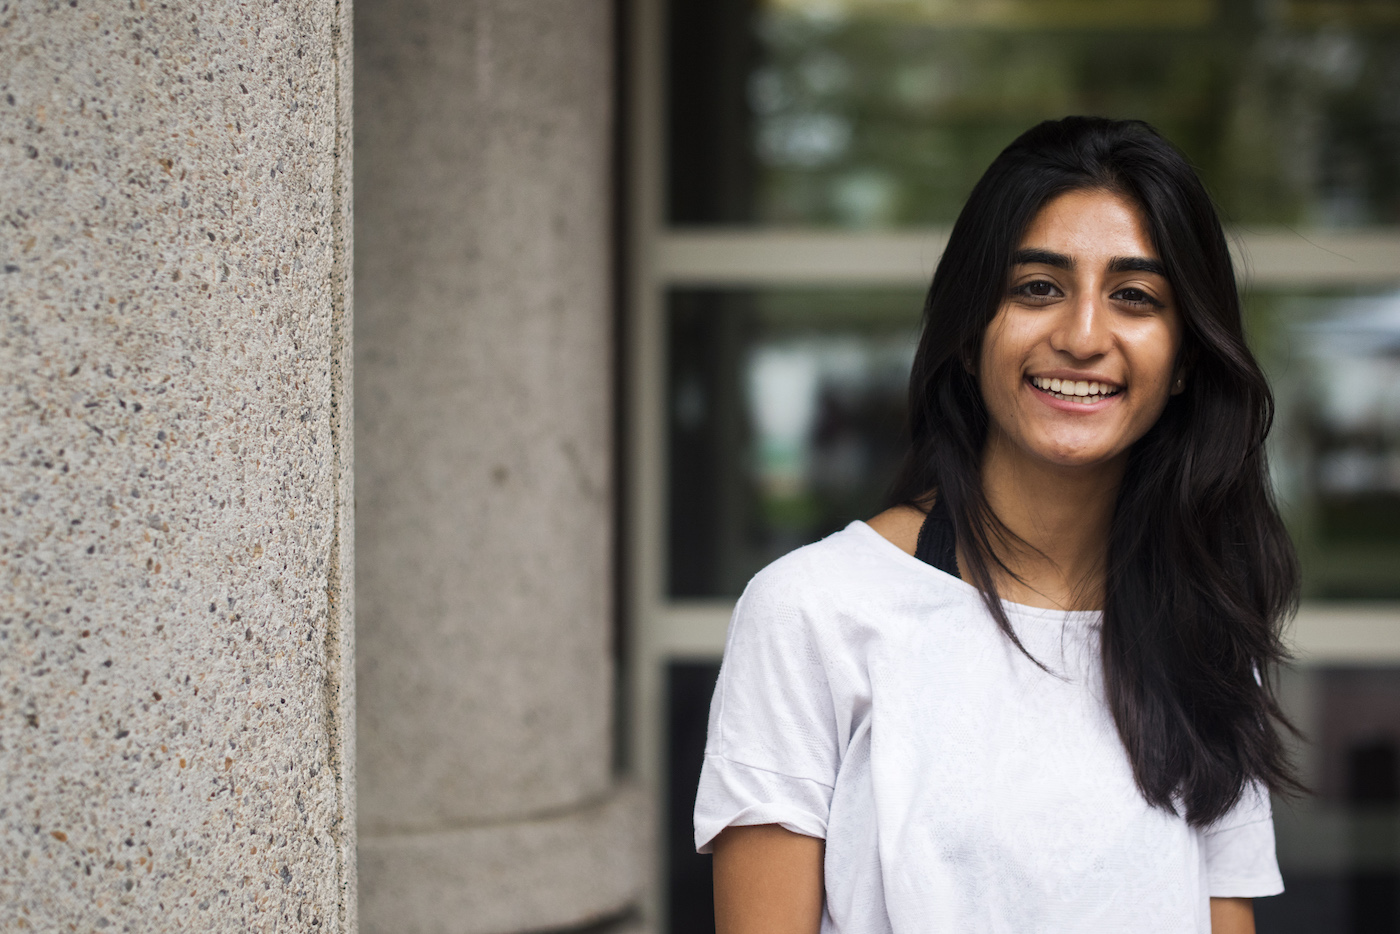 Sonali Chawla, S'21, poses for a portrait outside of Shillman Hall on the first day of class on Sept. 6, 2017.